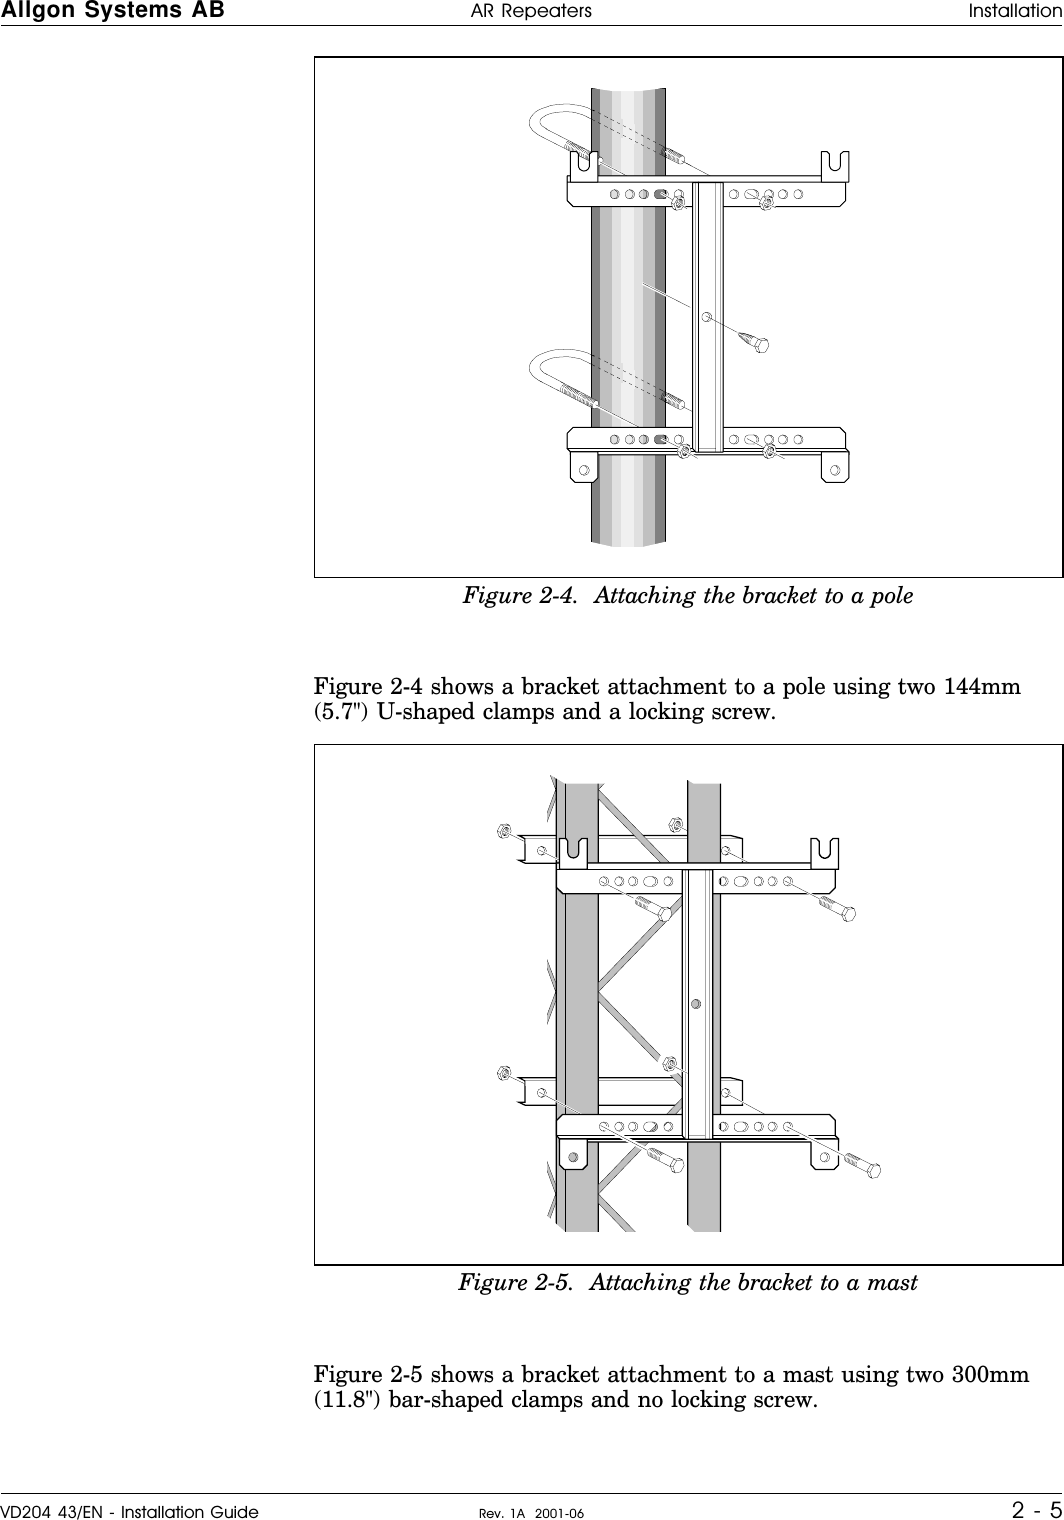    Figure 2-4 shows a bracket attachment to a pole using two 144mm(5.7&quot;) U-shaped clamps and a locking screw.Figure 2-5 shows a bracket attachment to a mast using two 300mm(11.8&quot;) bar-shaped clamps and no locking screw.Figure 2-4.  Attaching the bracket to a poleFigure 2-5.  Attaching the bracket to a mastAllgon Systems AB AR Repeaters InstallationVD204 43/EN - Installation Guide Rev. 1A  2001-06 2 - 5